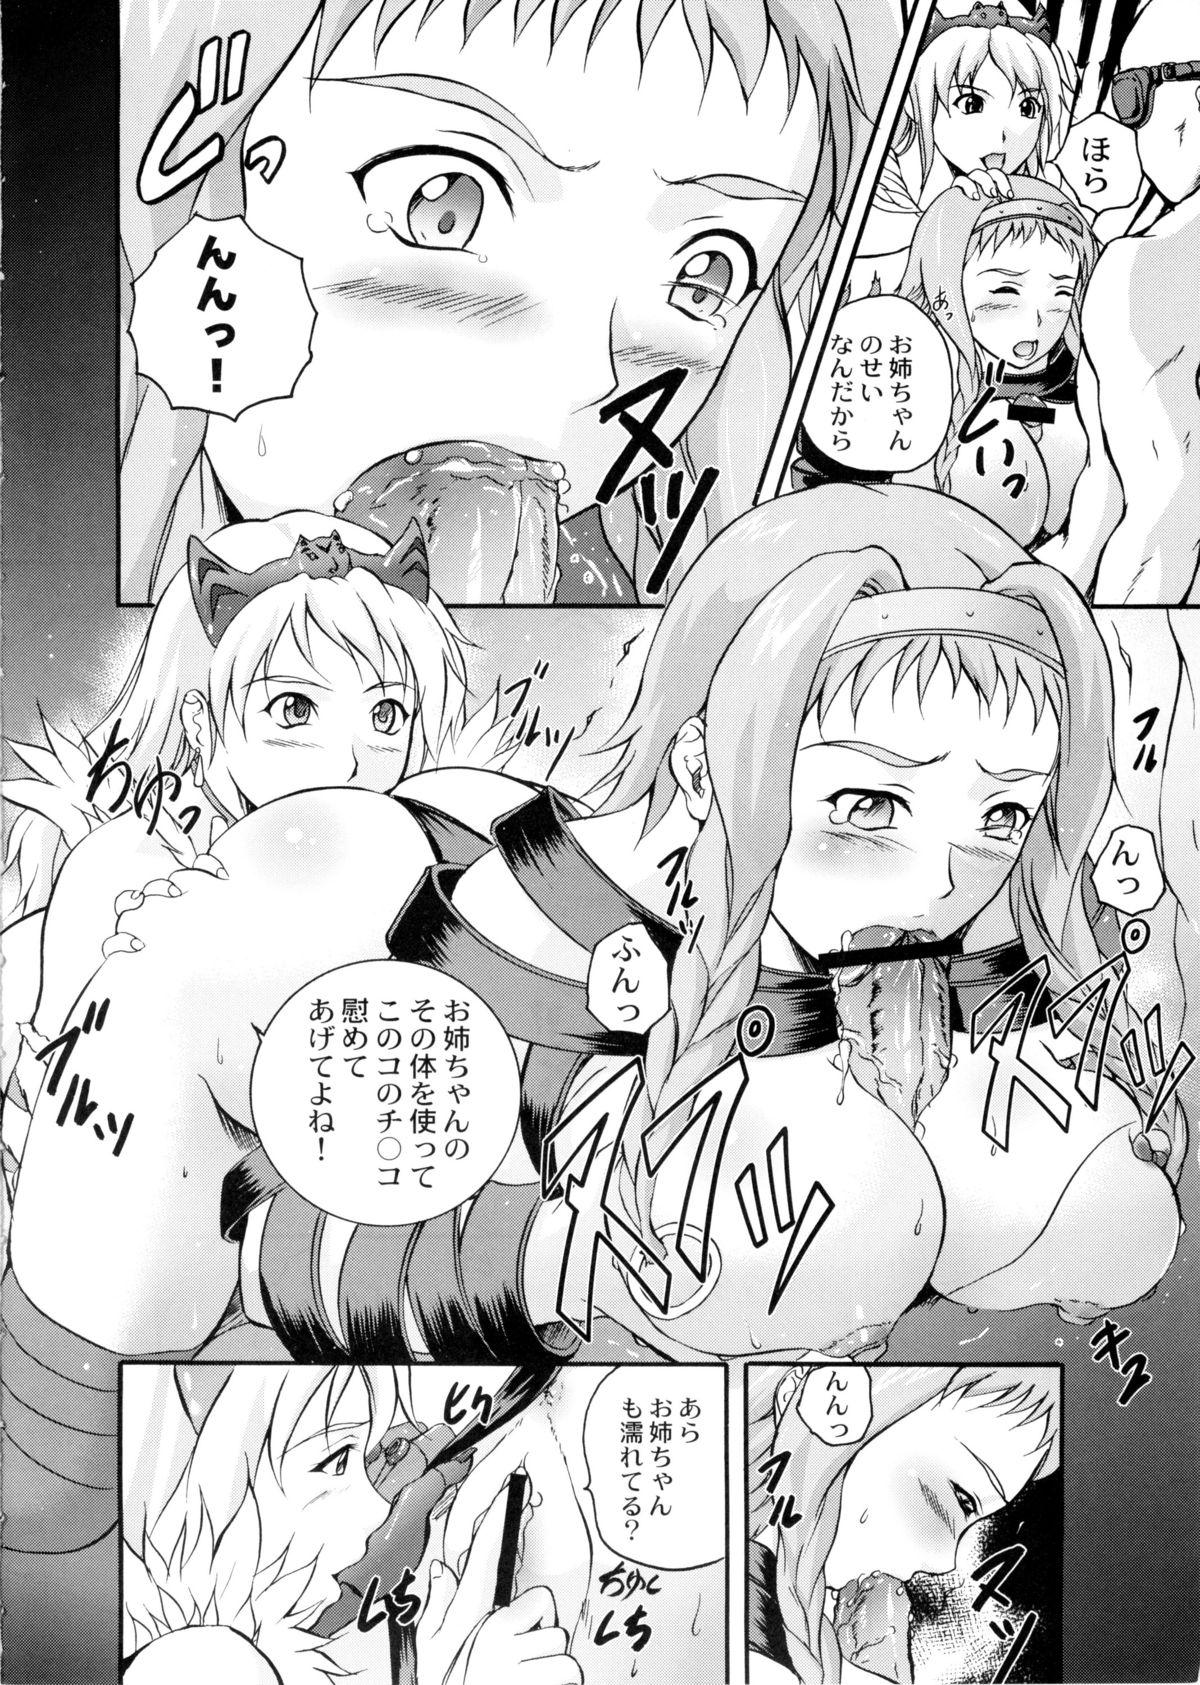 Threeway Sister's Blade - Queens blade Gay Military - Page 7